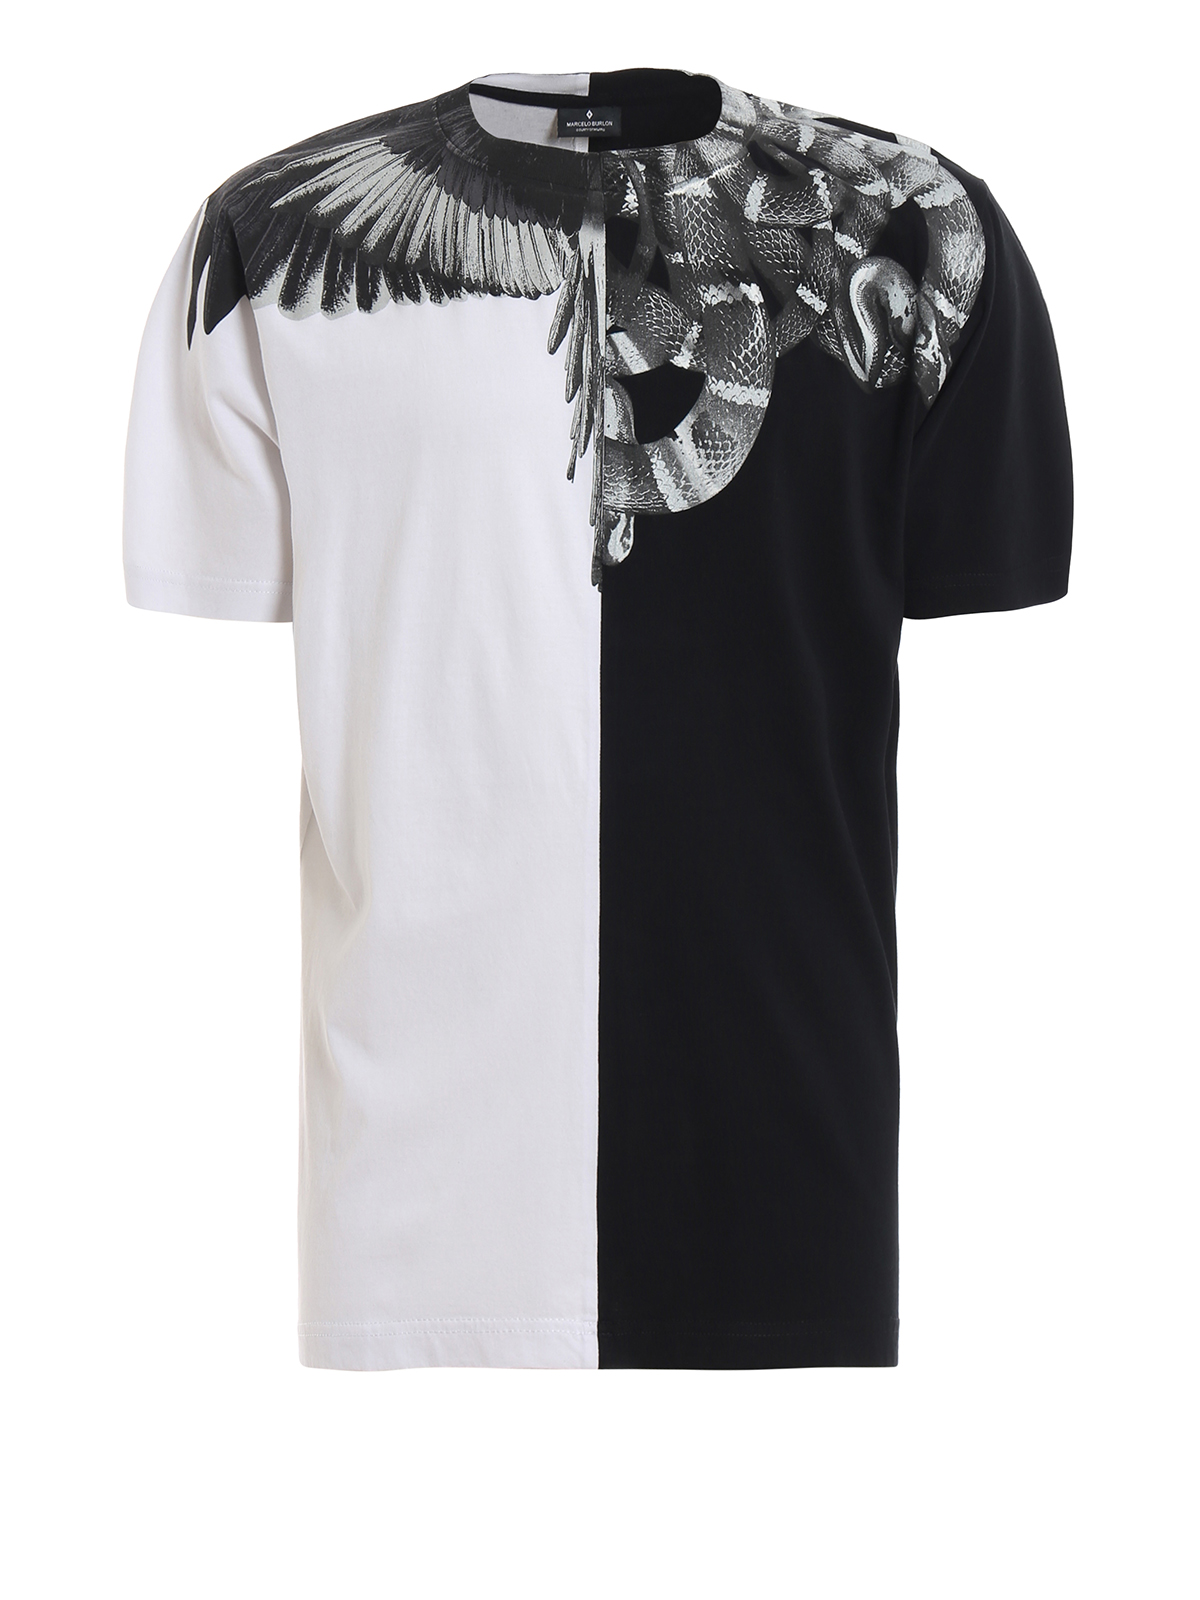 T-shirts Marcelo Burlon - Wings Snakes black and white -